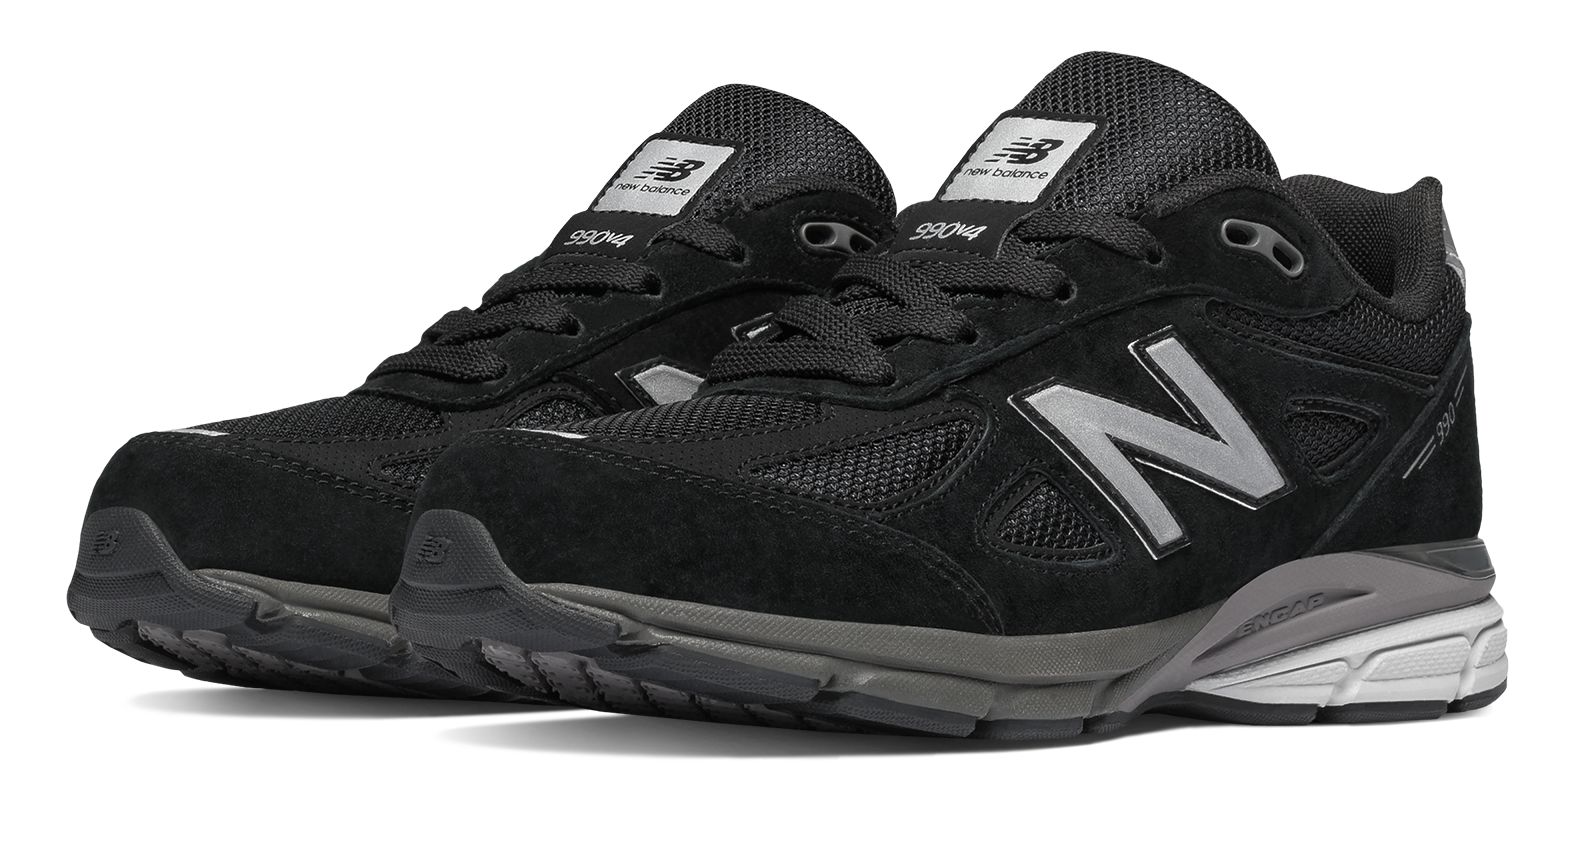 Black New Balance 990: A Shoe that Commands Attention